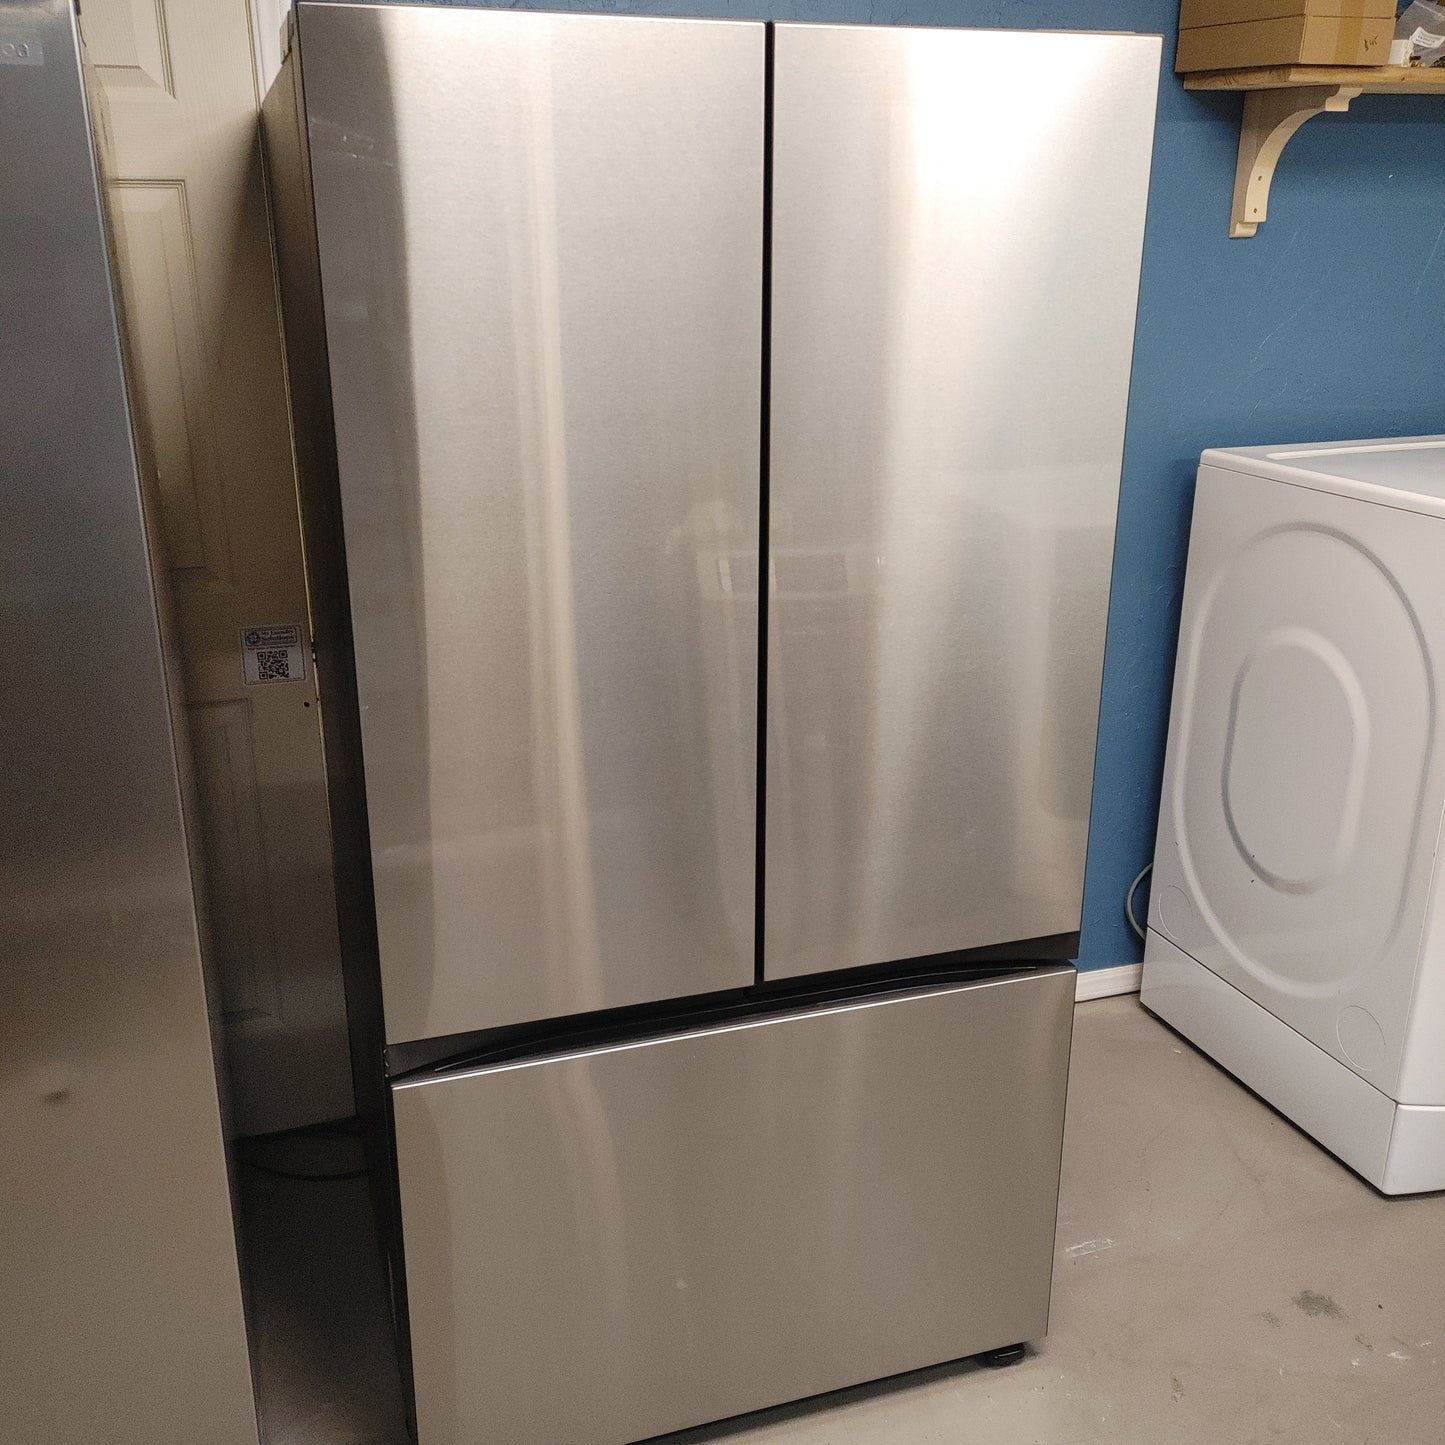 New Samsung 30.1 CUBIC FT Stainless French Door woth ice